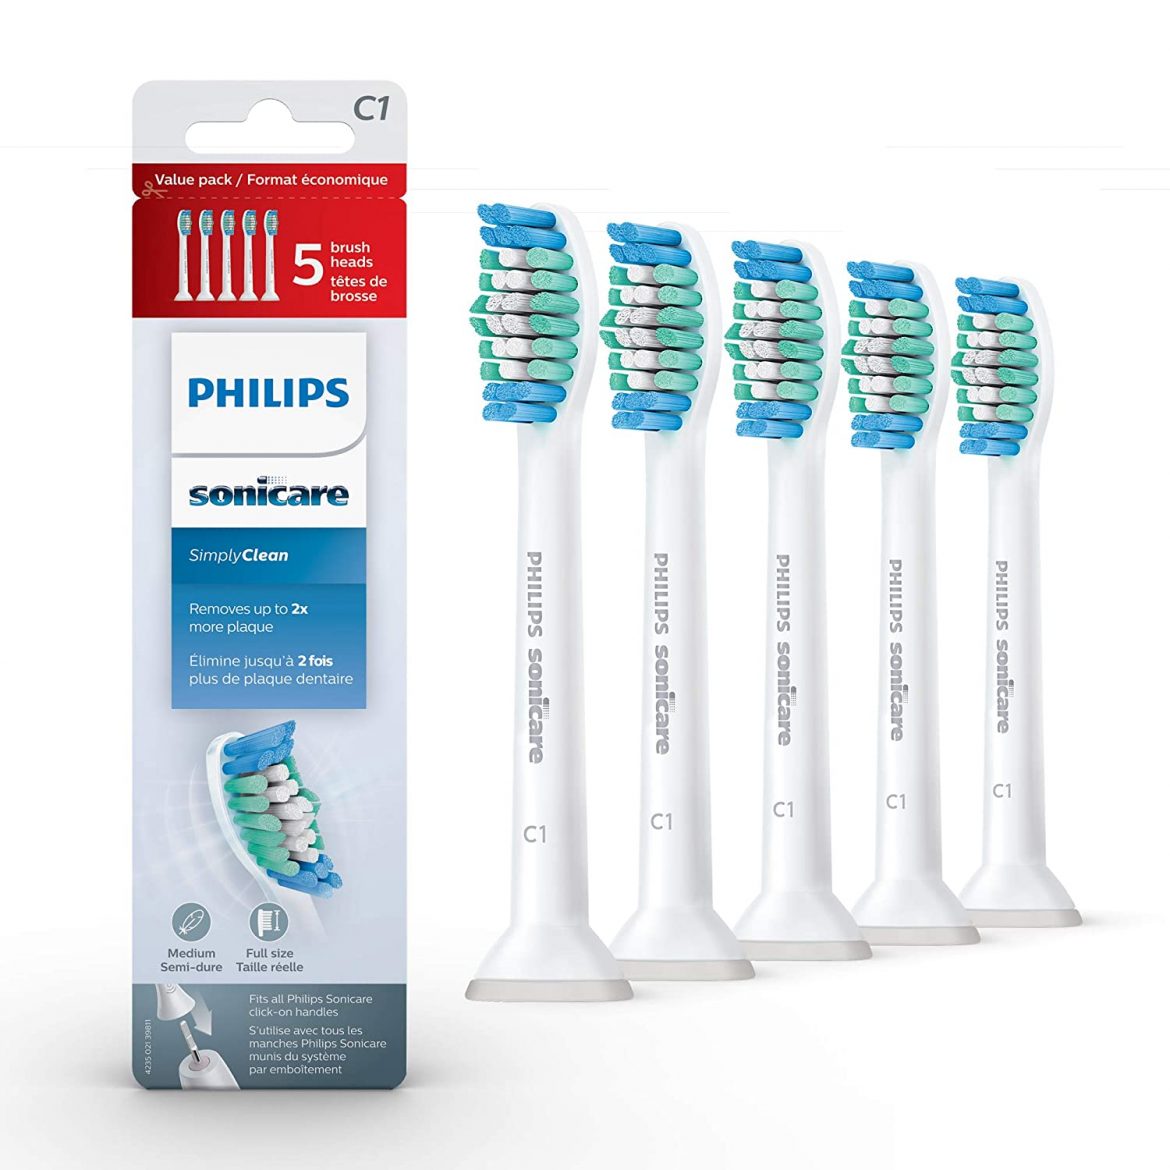 Philips Sonicare Genuine SimplyClean Replacement Toothbrush Heads, 5 Brush Heads